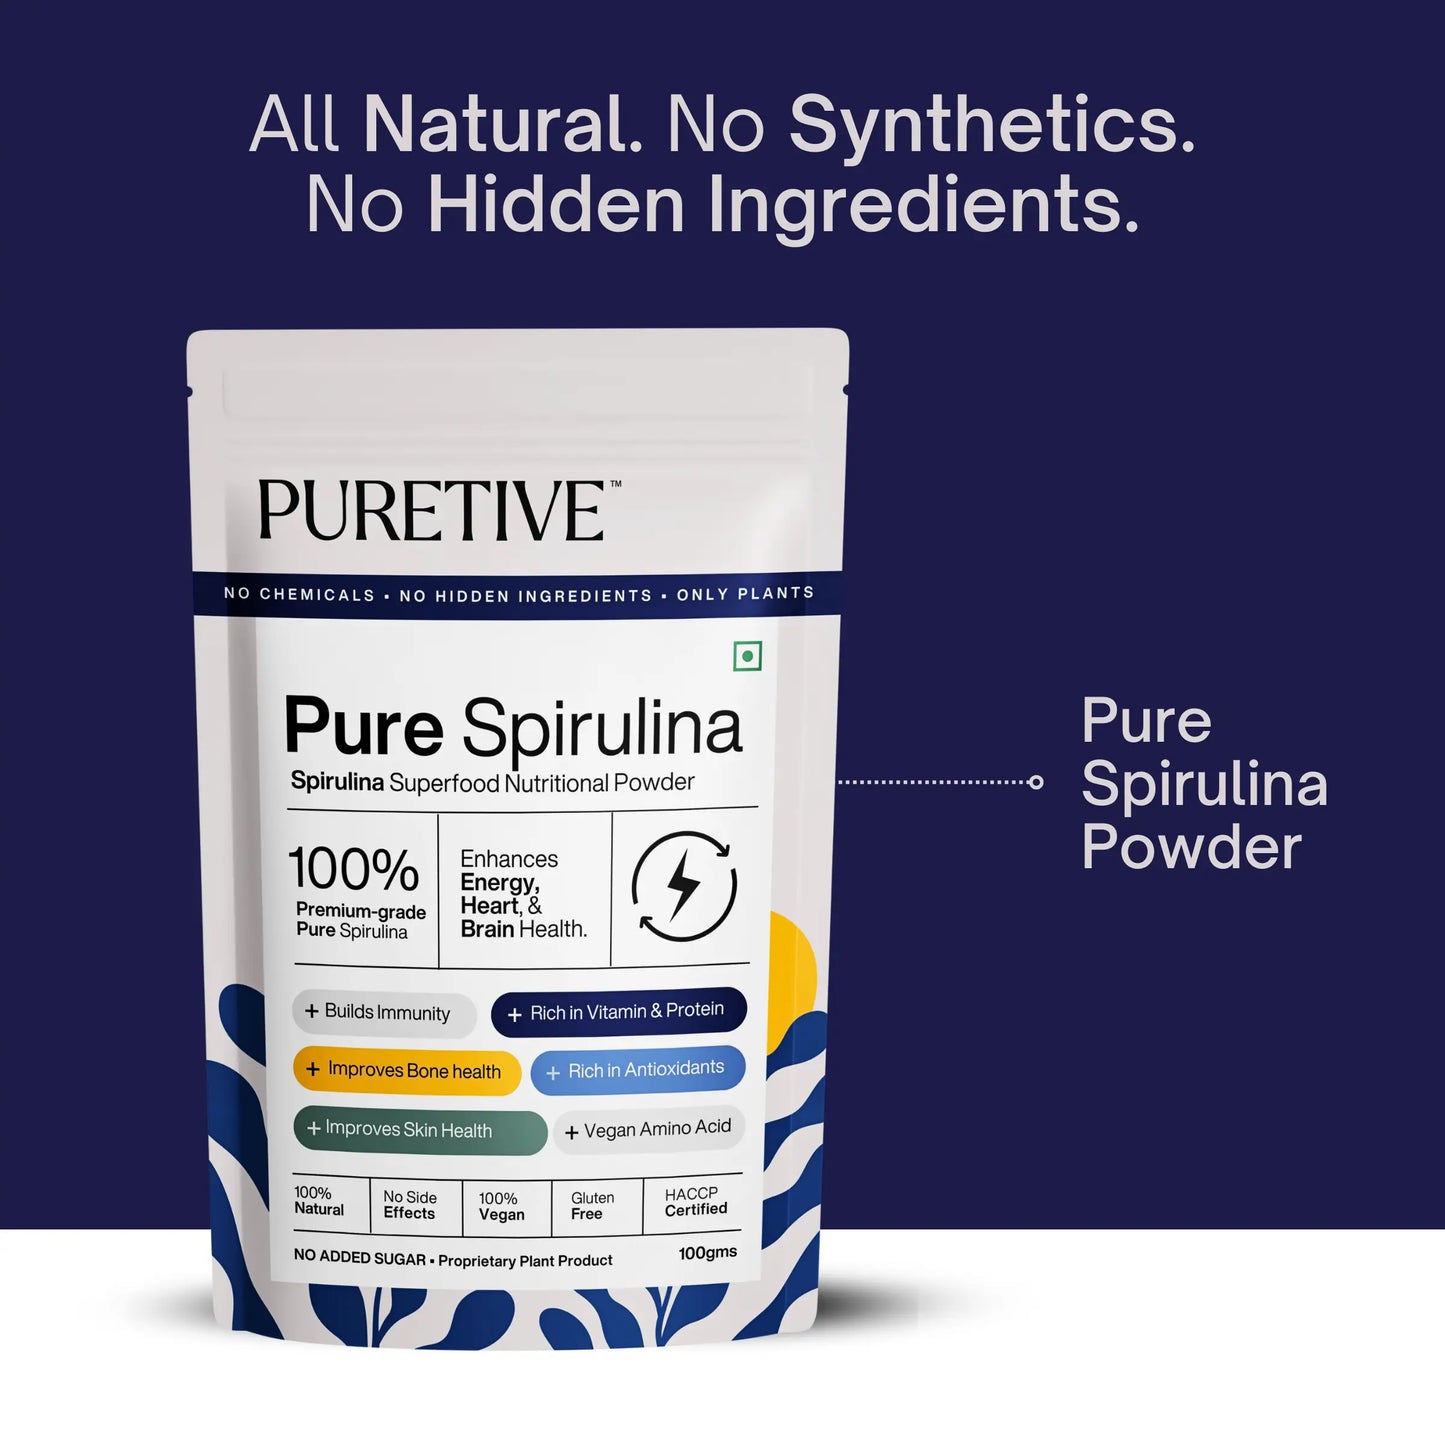 Picture of Puretive's Pure Spirulina Nutrition Mix packed with 100% Pure Spirulina Powder as it helps in BUilding immunity, rich in vitamins & Proteins, improves bone health, rich in antioxidants & Improves skin health.